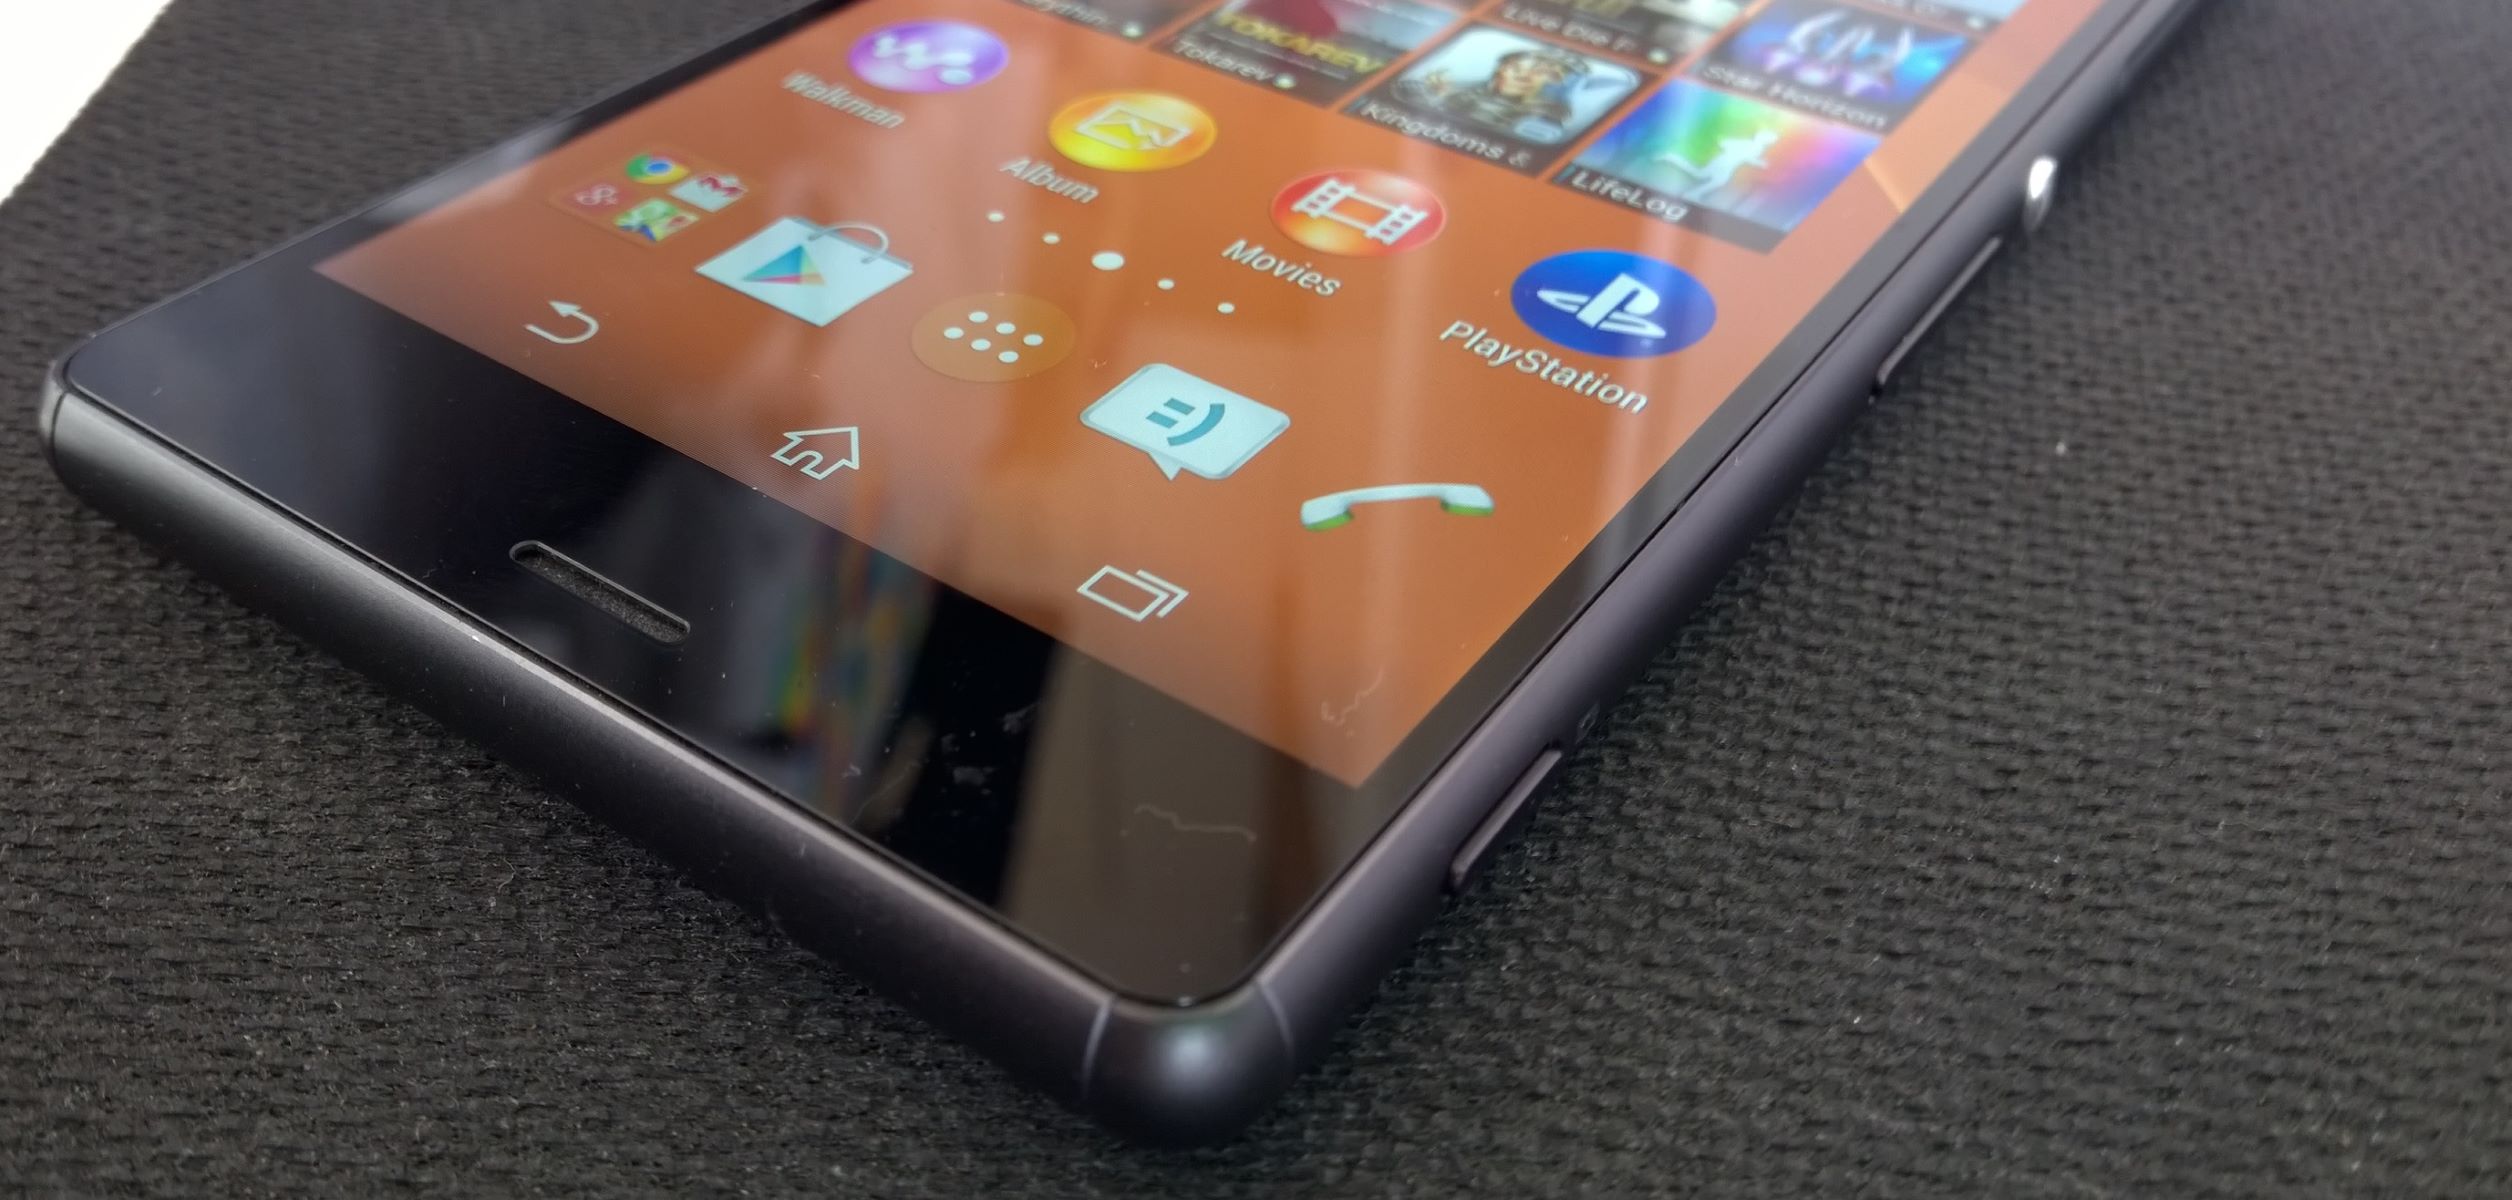 Unlocking And Rooting Guide: Xperia Z3 Tablet Compact